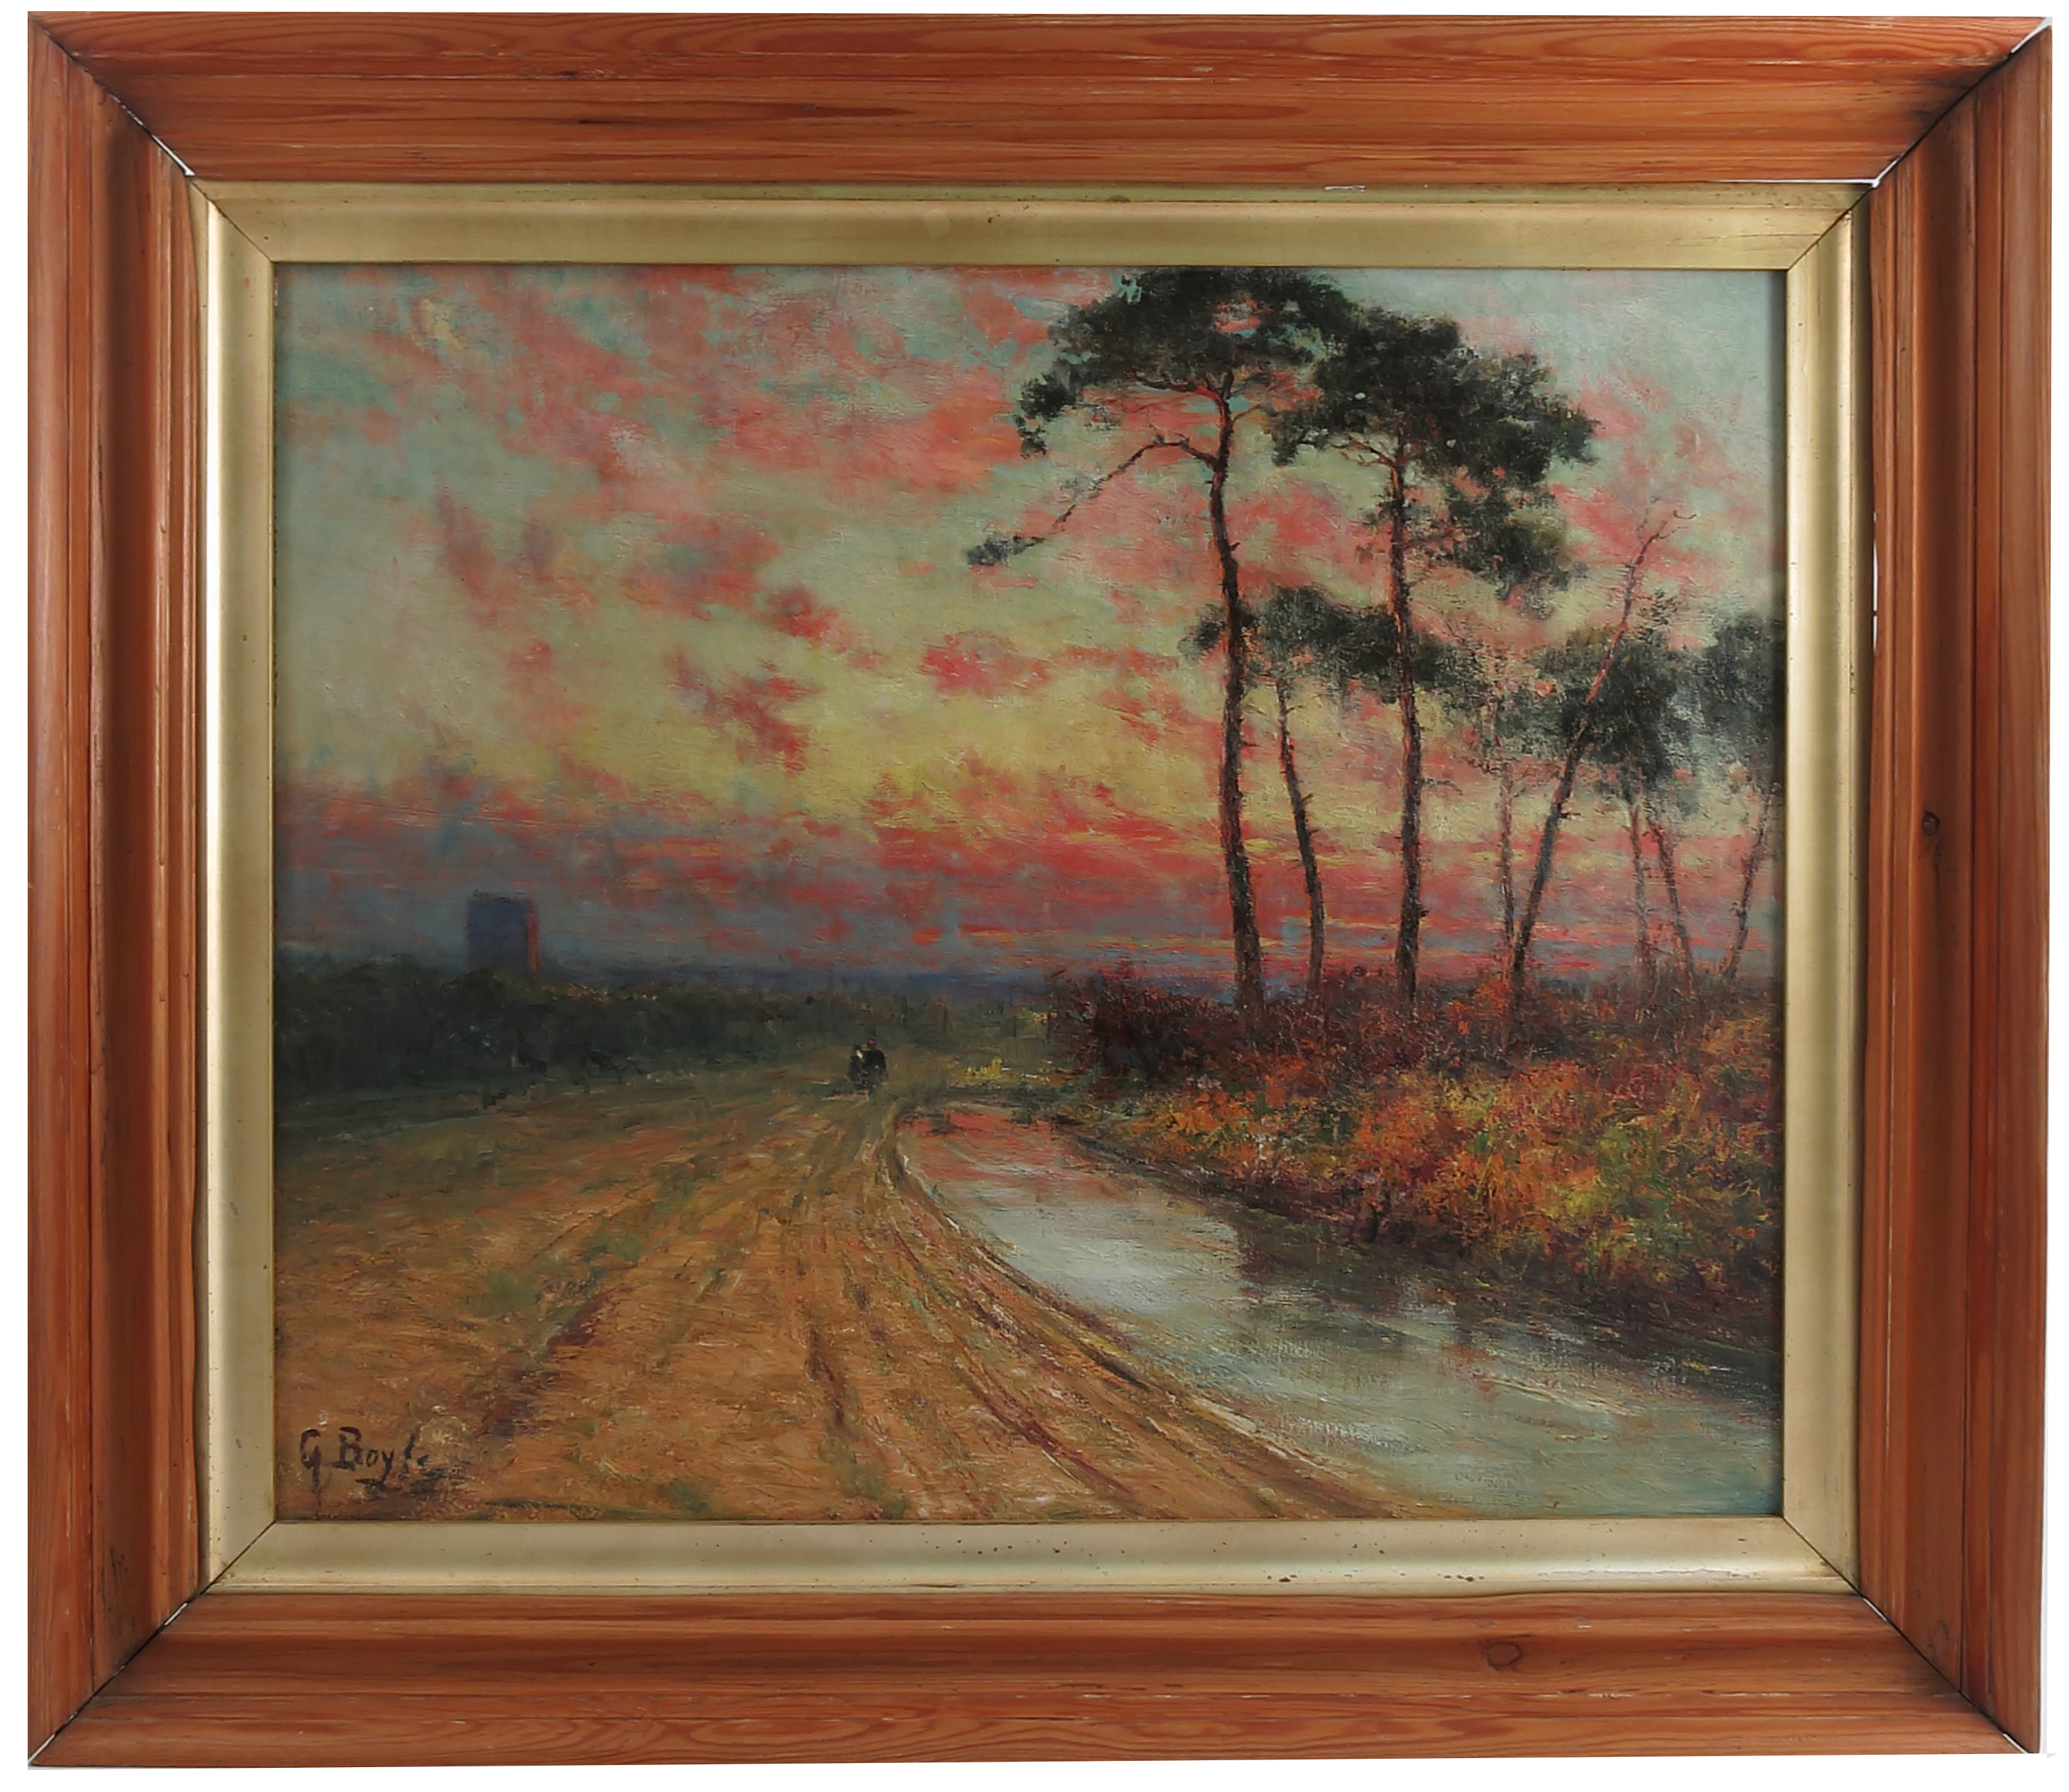 G Boyle, oil on canvas, landscape with red sky and figures on a lane,